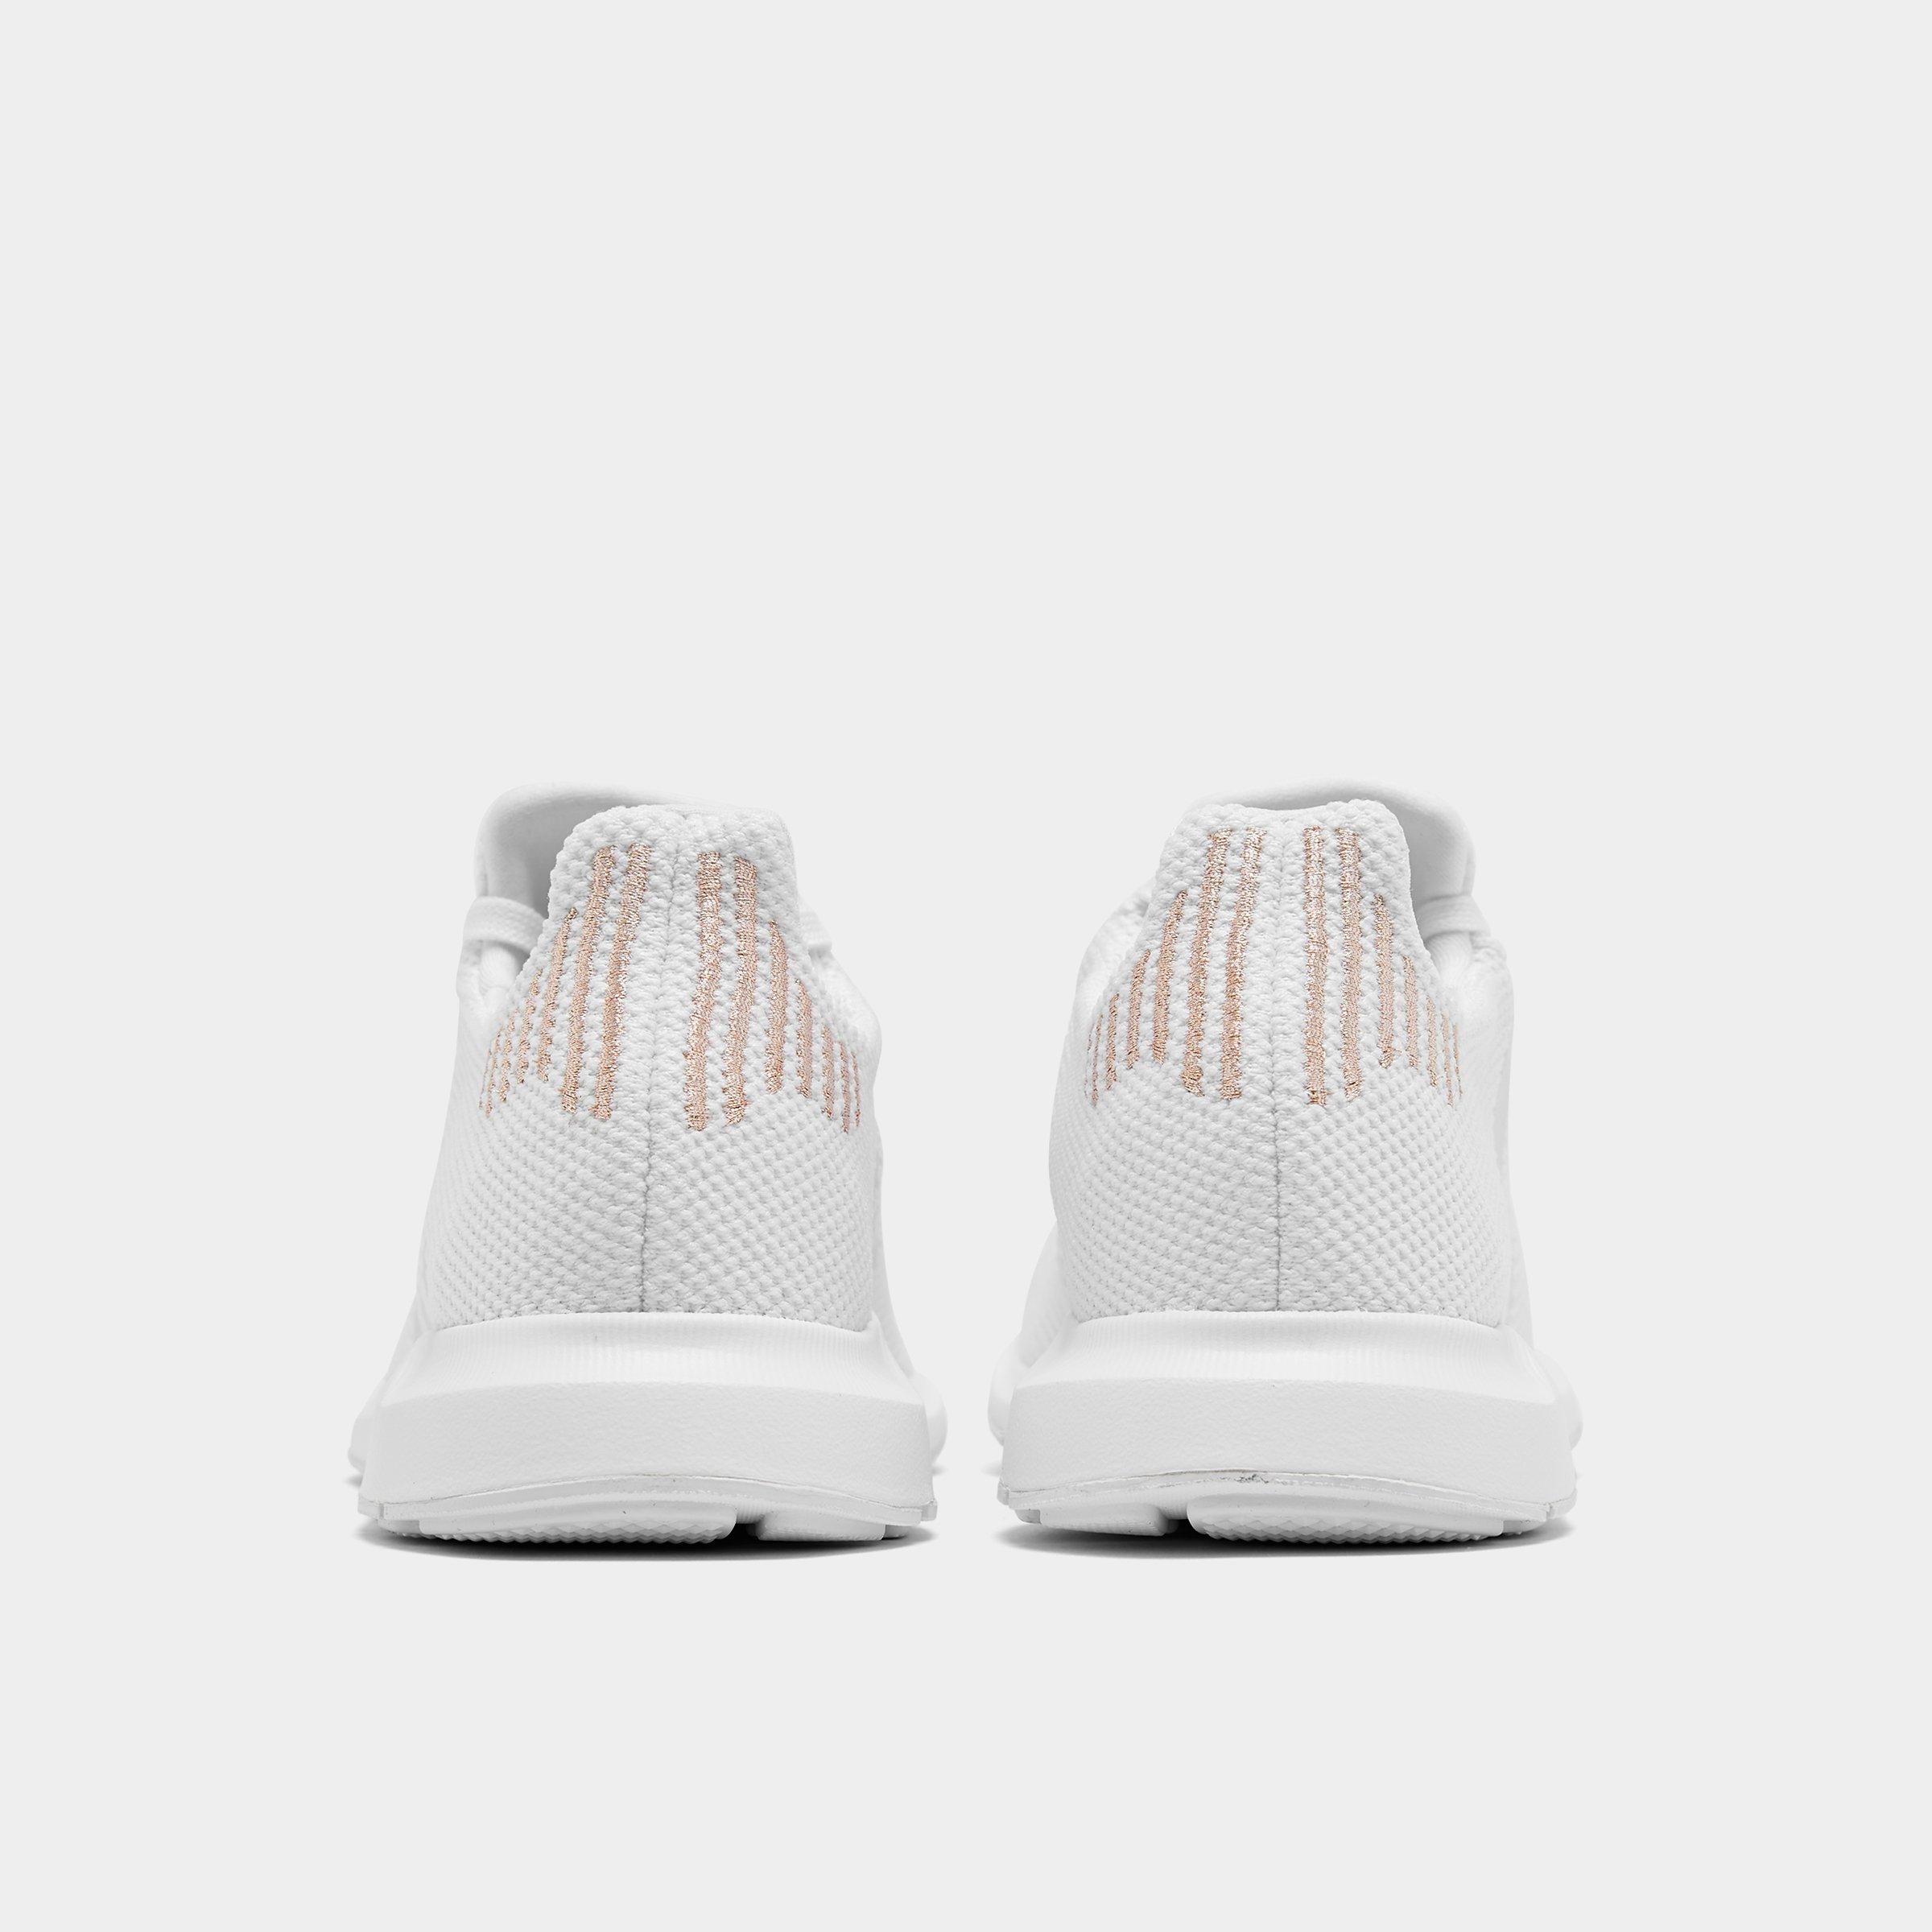 adidas swift run white and crystal shoes